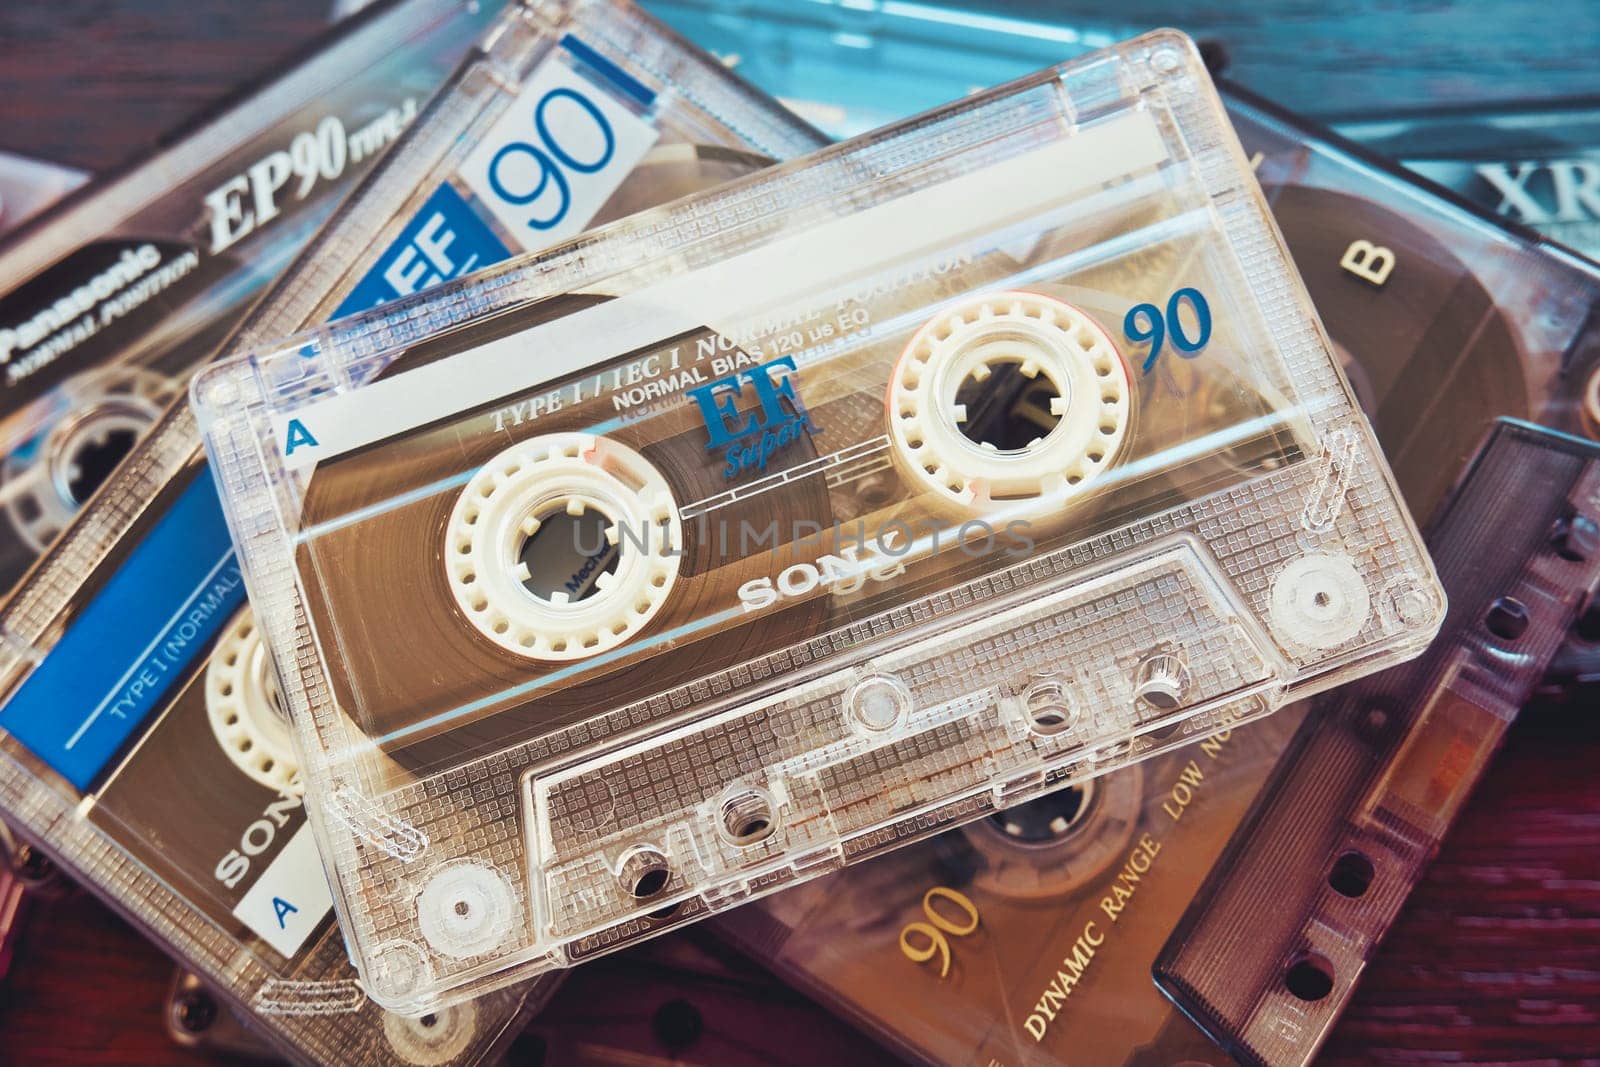 Ryazan, Russia - April 27, 2023: An old Sony audio cassette lies on different cassettes